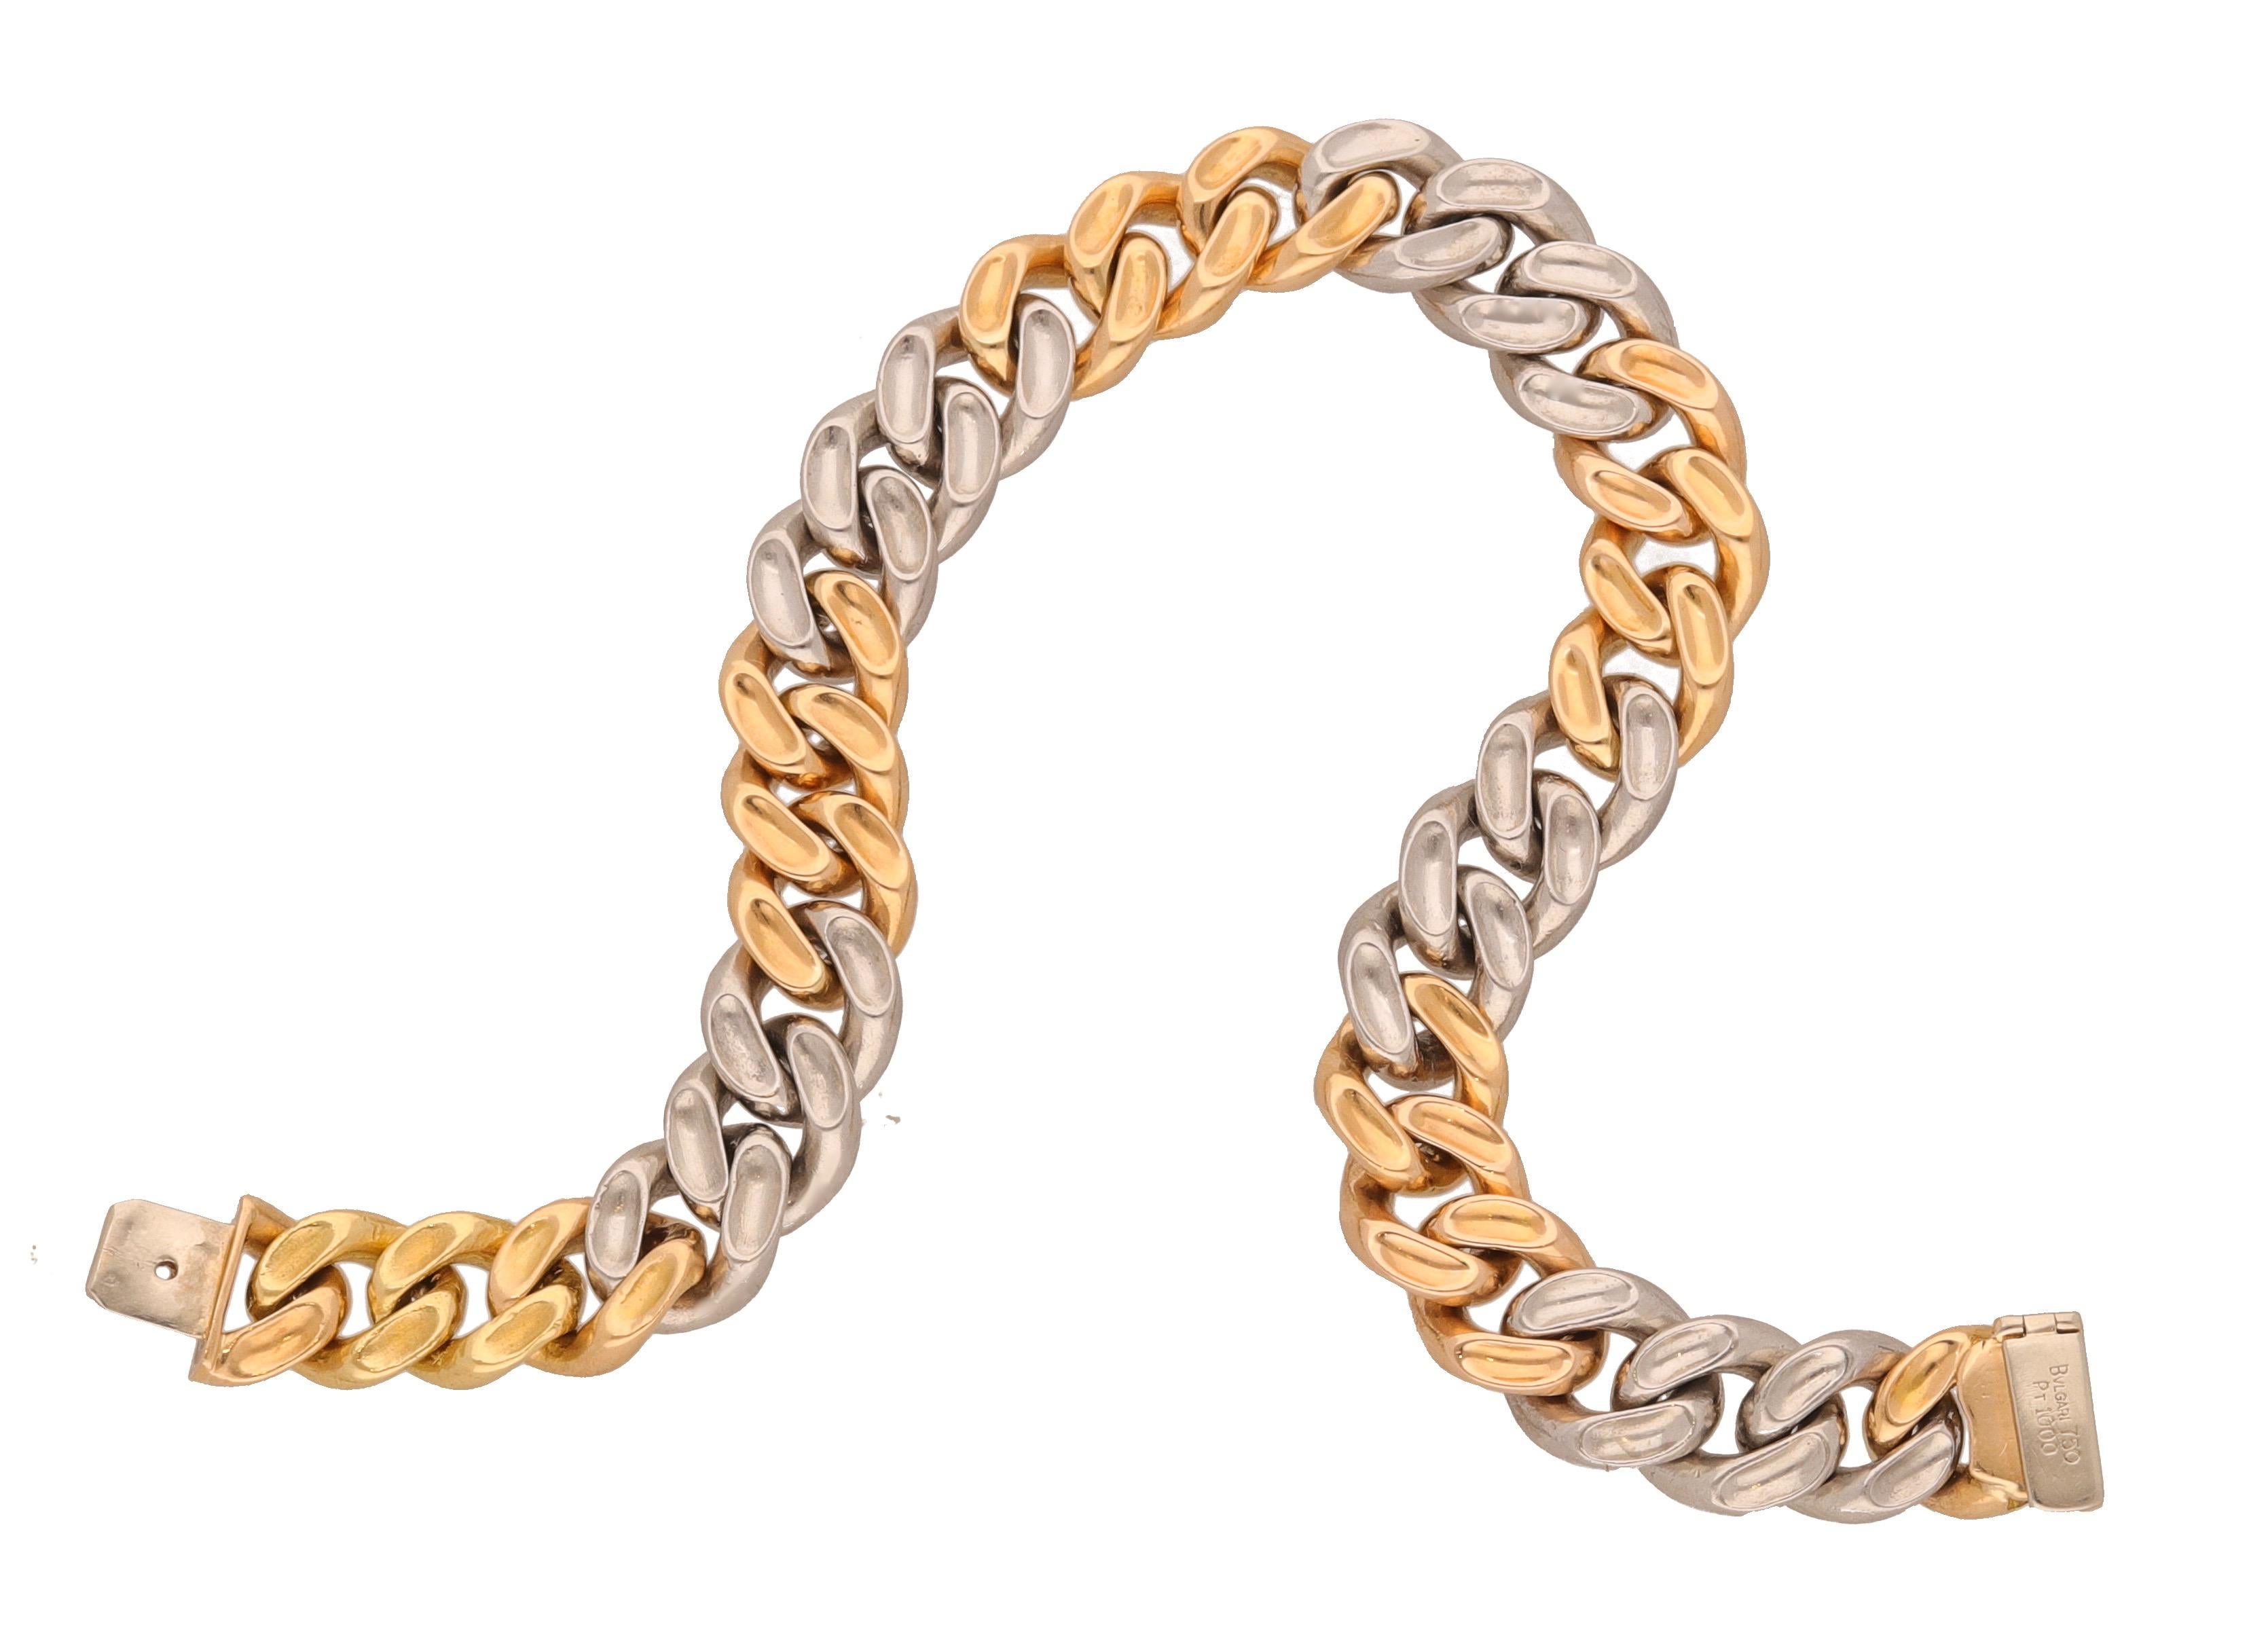 18 Kt. rose gold and platinum groumette bracelet signed by Bulgari.
This elegant chain bracelet can be easily combine with any style.
Comes in the original box.
1980 circa.